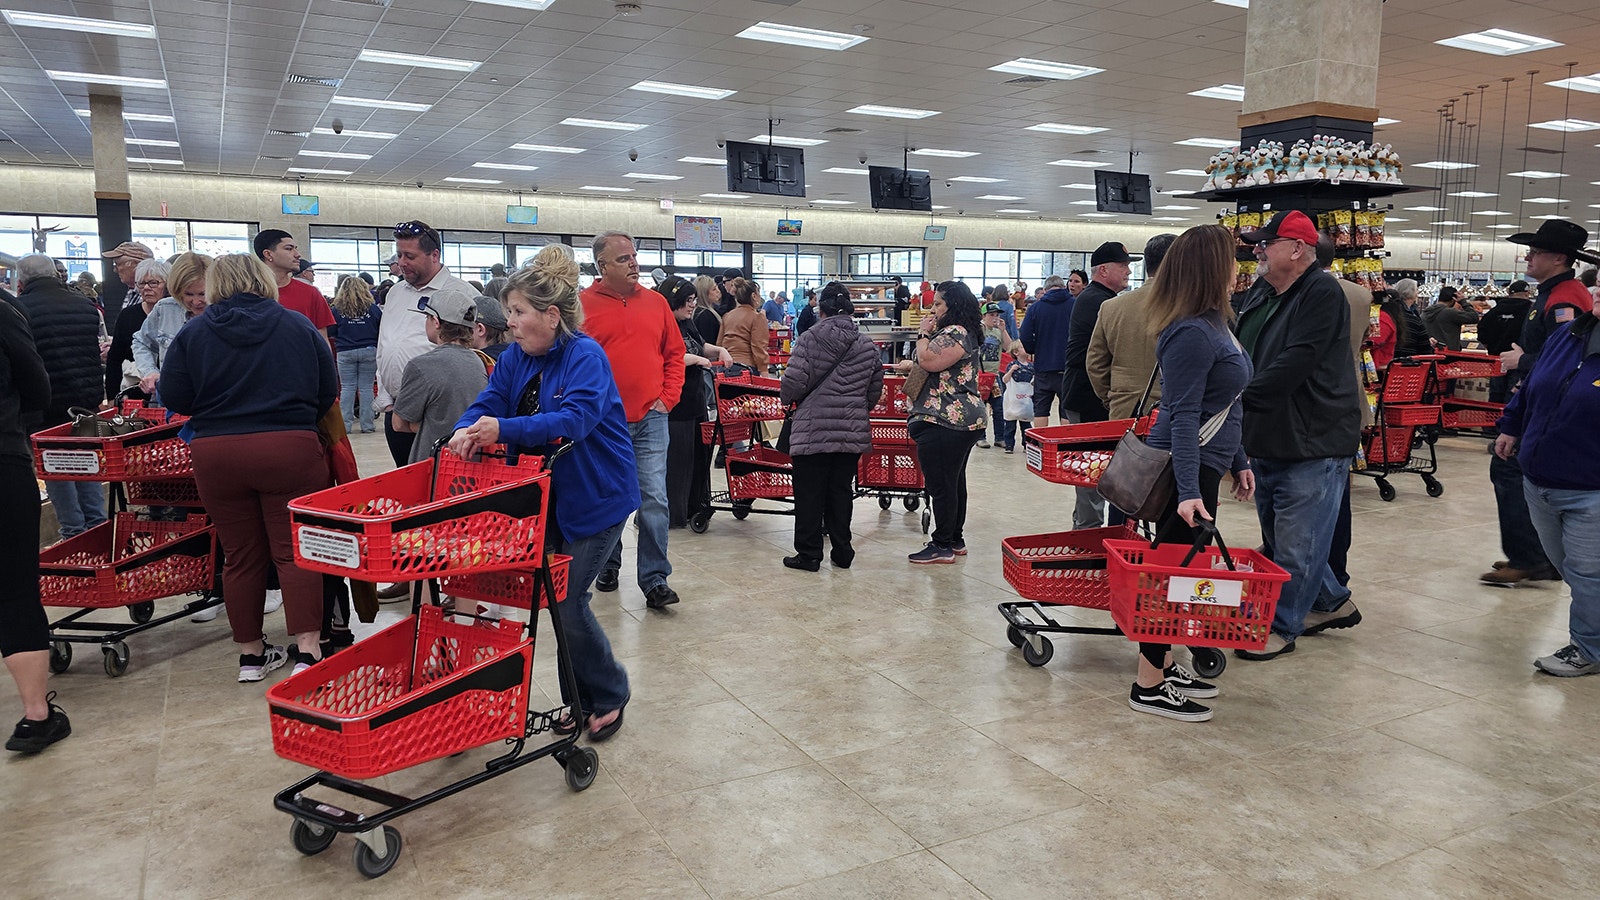 The 75,000-square-foot Buc-ee's store in Johnstown, Colorado, hosted thousands of shoppers for its opening day Monday.